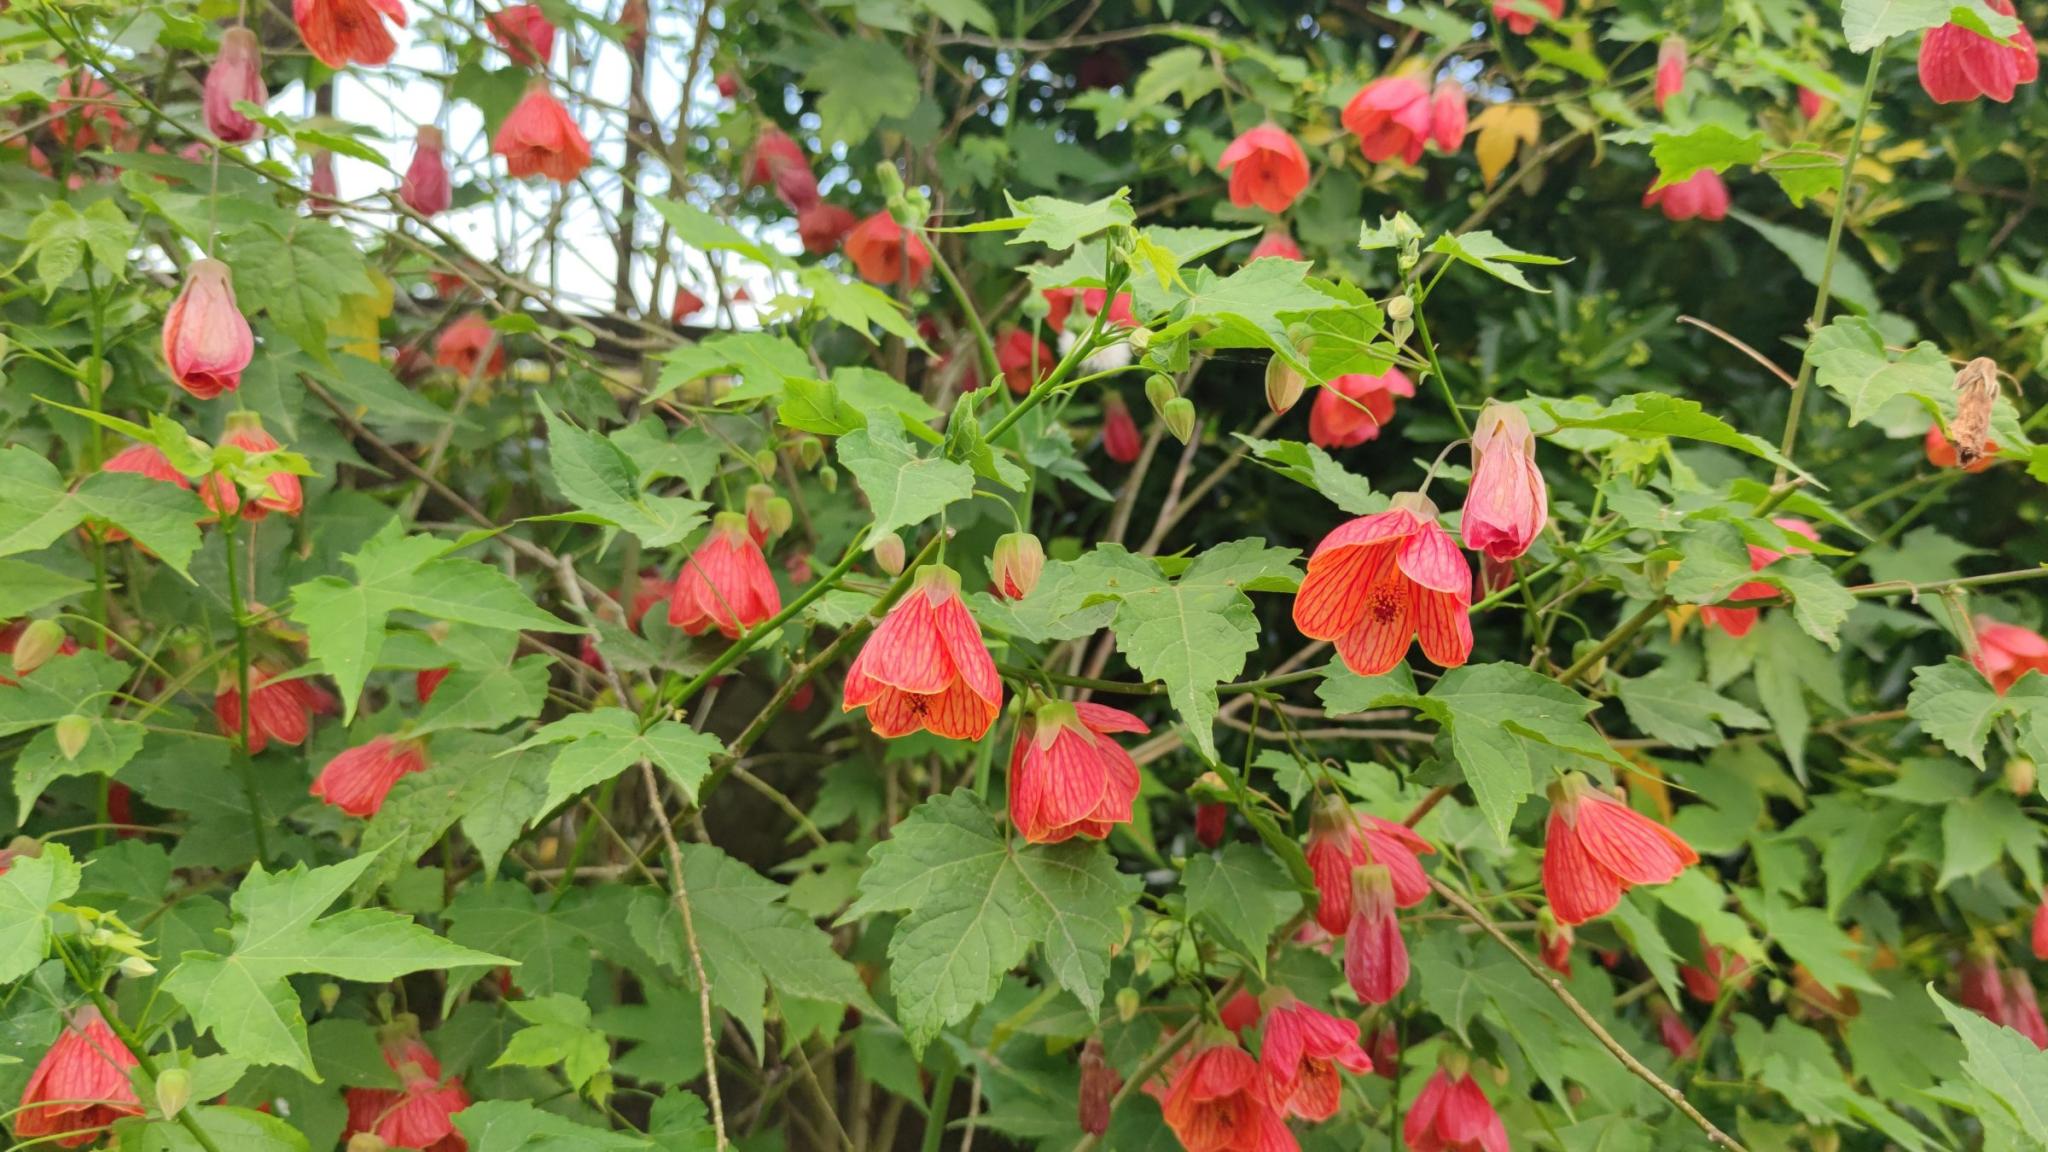 Abutilon striatum (Red Vein Indian Mallow), a showy plant with orange blooms of bell-shaped flowers. The blooms have red veining over yellow. Abutilon hybrid Juliet